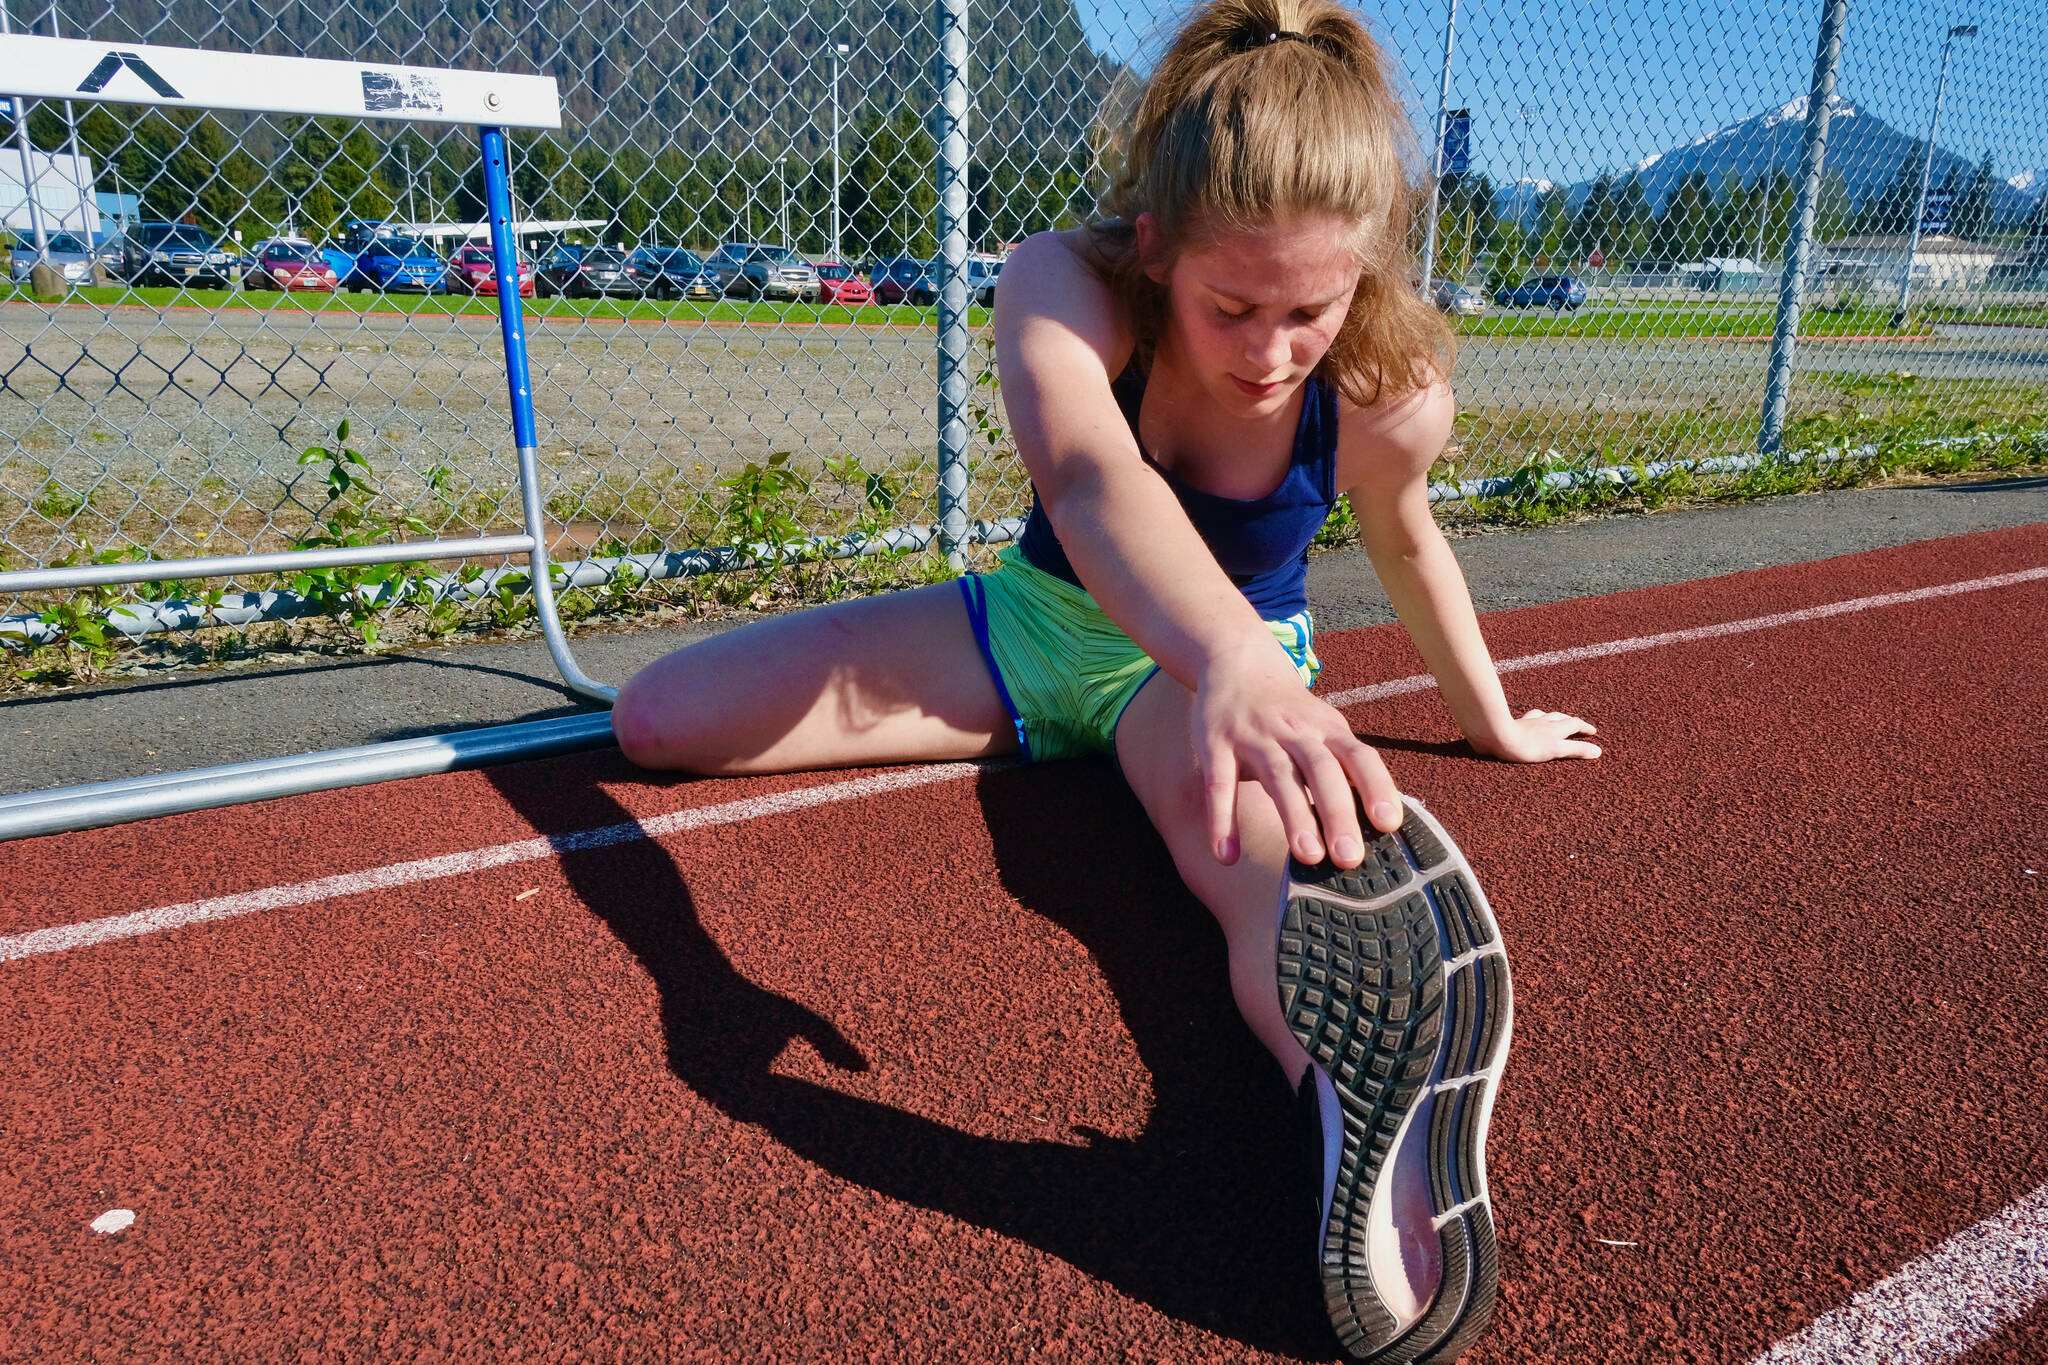 Thunder Mountain High School senior Mallory Welling stretches before a Falcons track practice on Wednesday. The Region V Track & Field Championships are Friday and Saturday at Falcons Field. (Klas Stolpe / Juneau Empire)